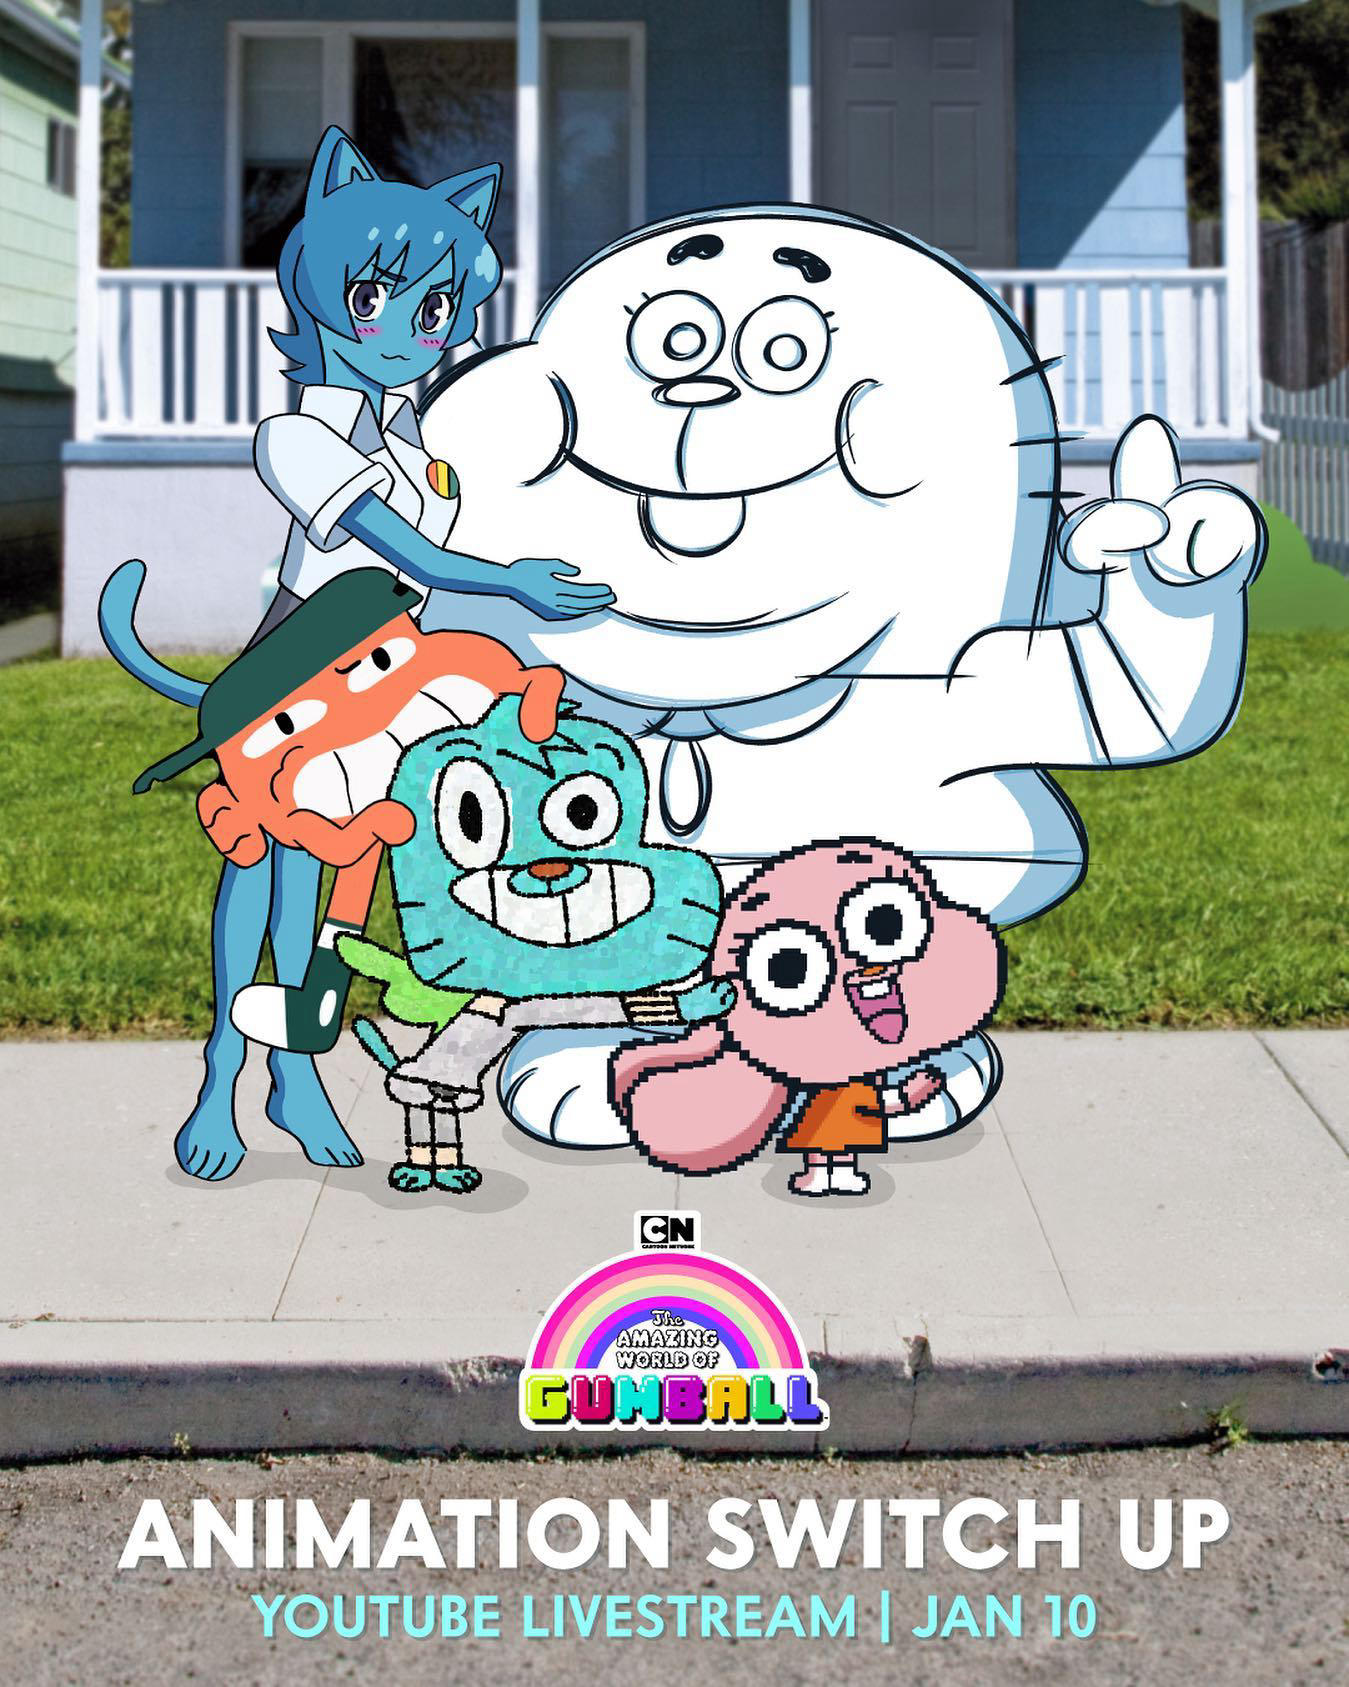 Cartoon Network - We’ re streaming the very best Gumball eps with fun animation styles starting TODA